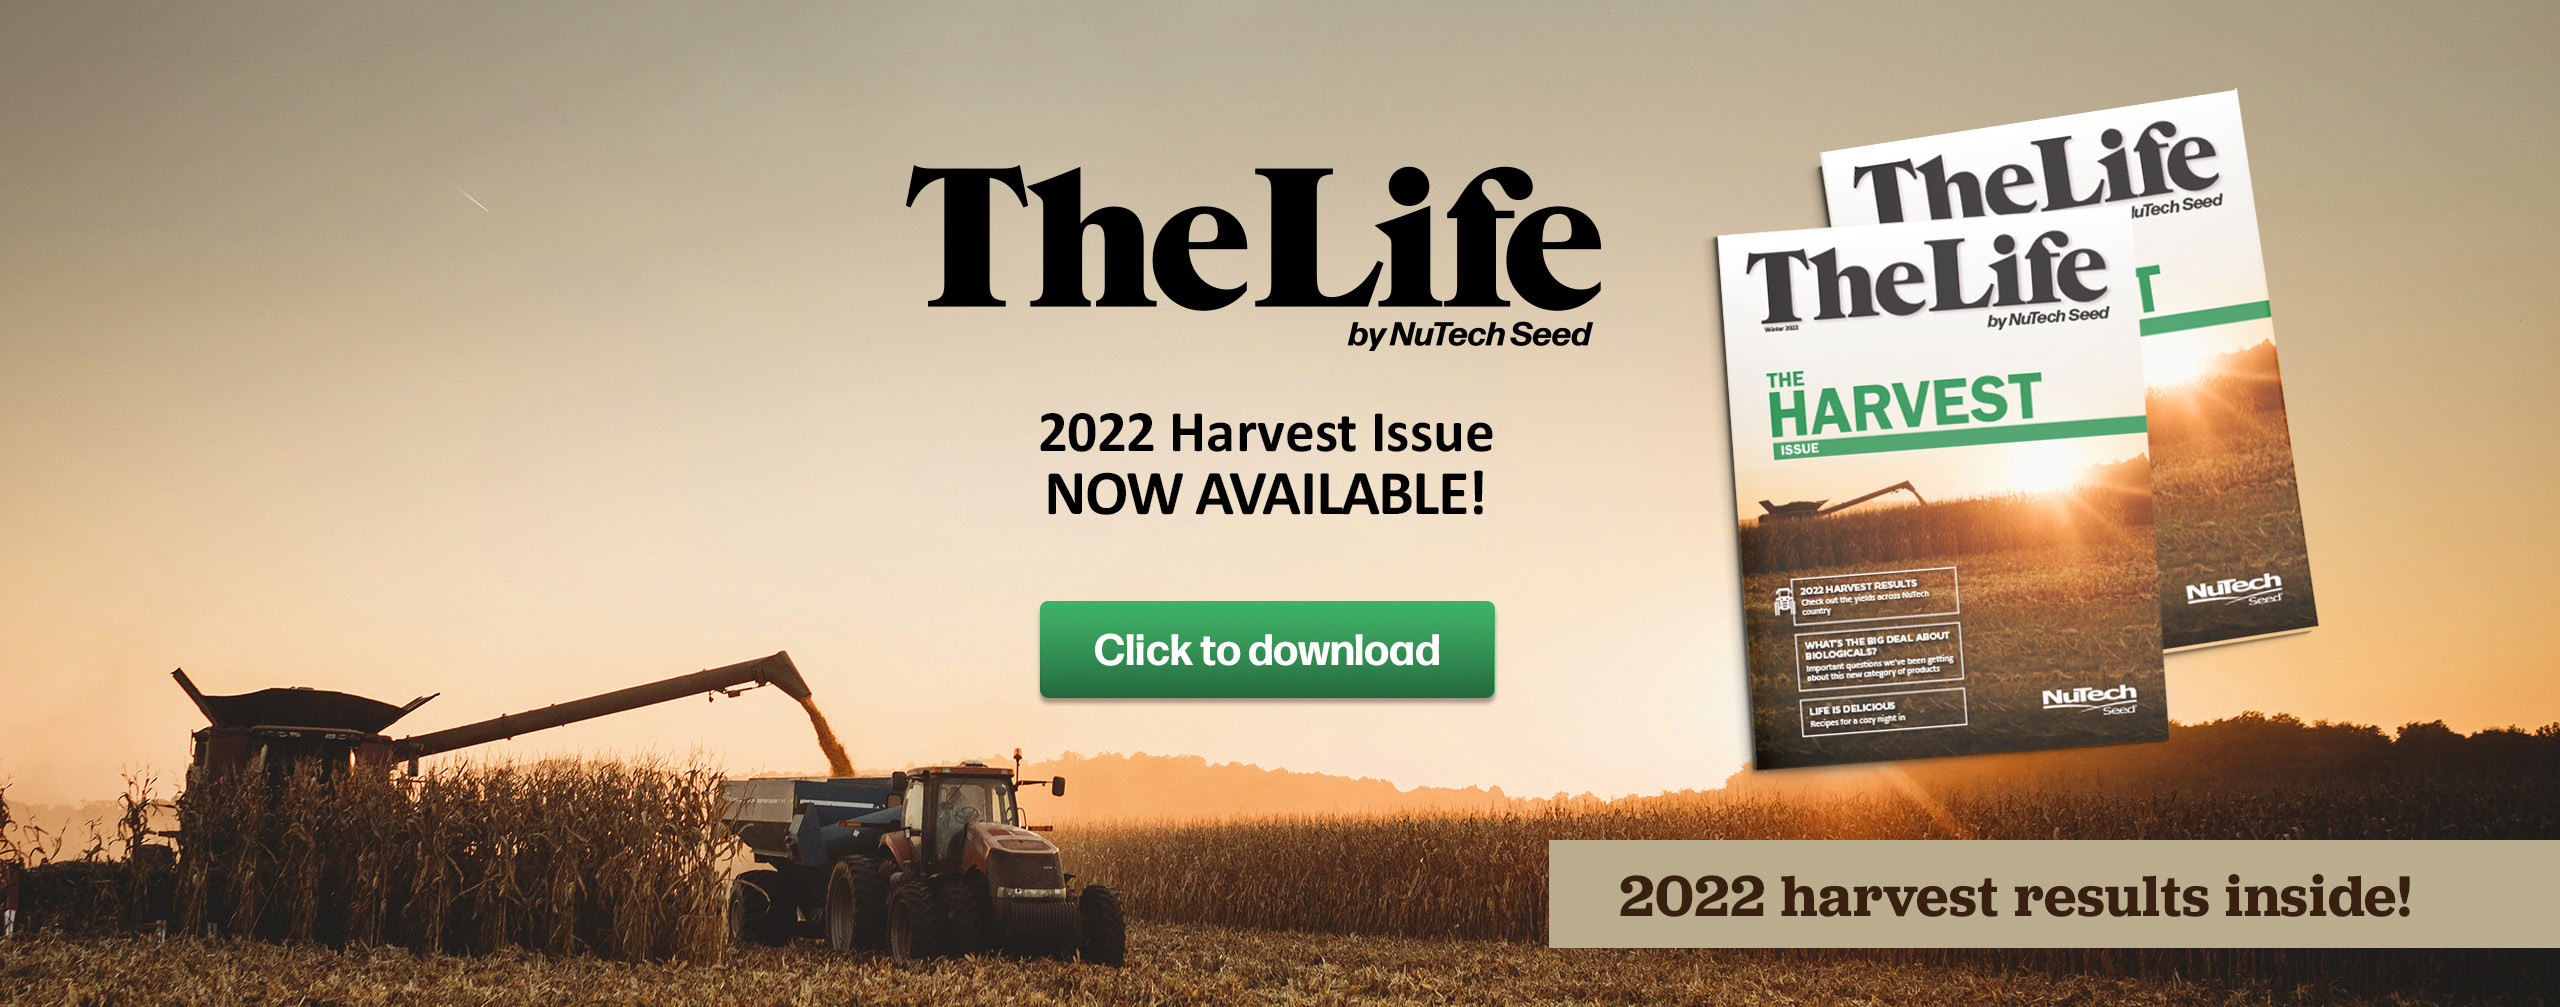 2022 Harvest Issue